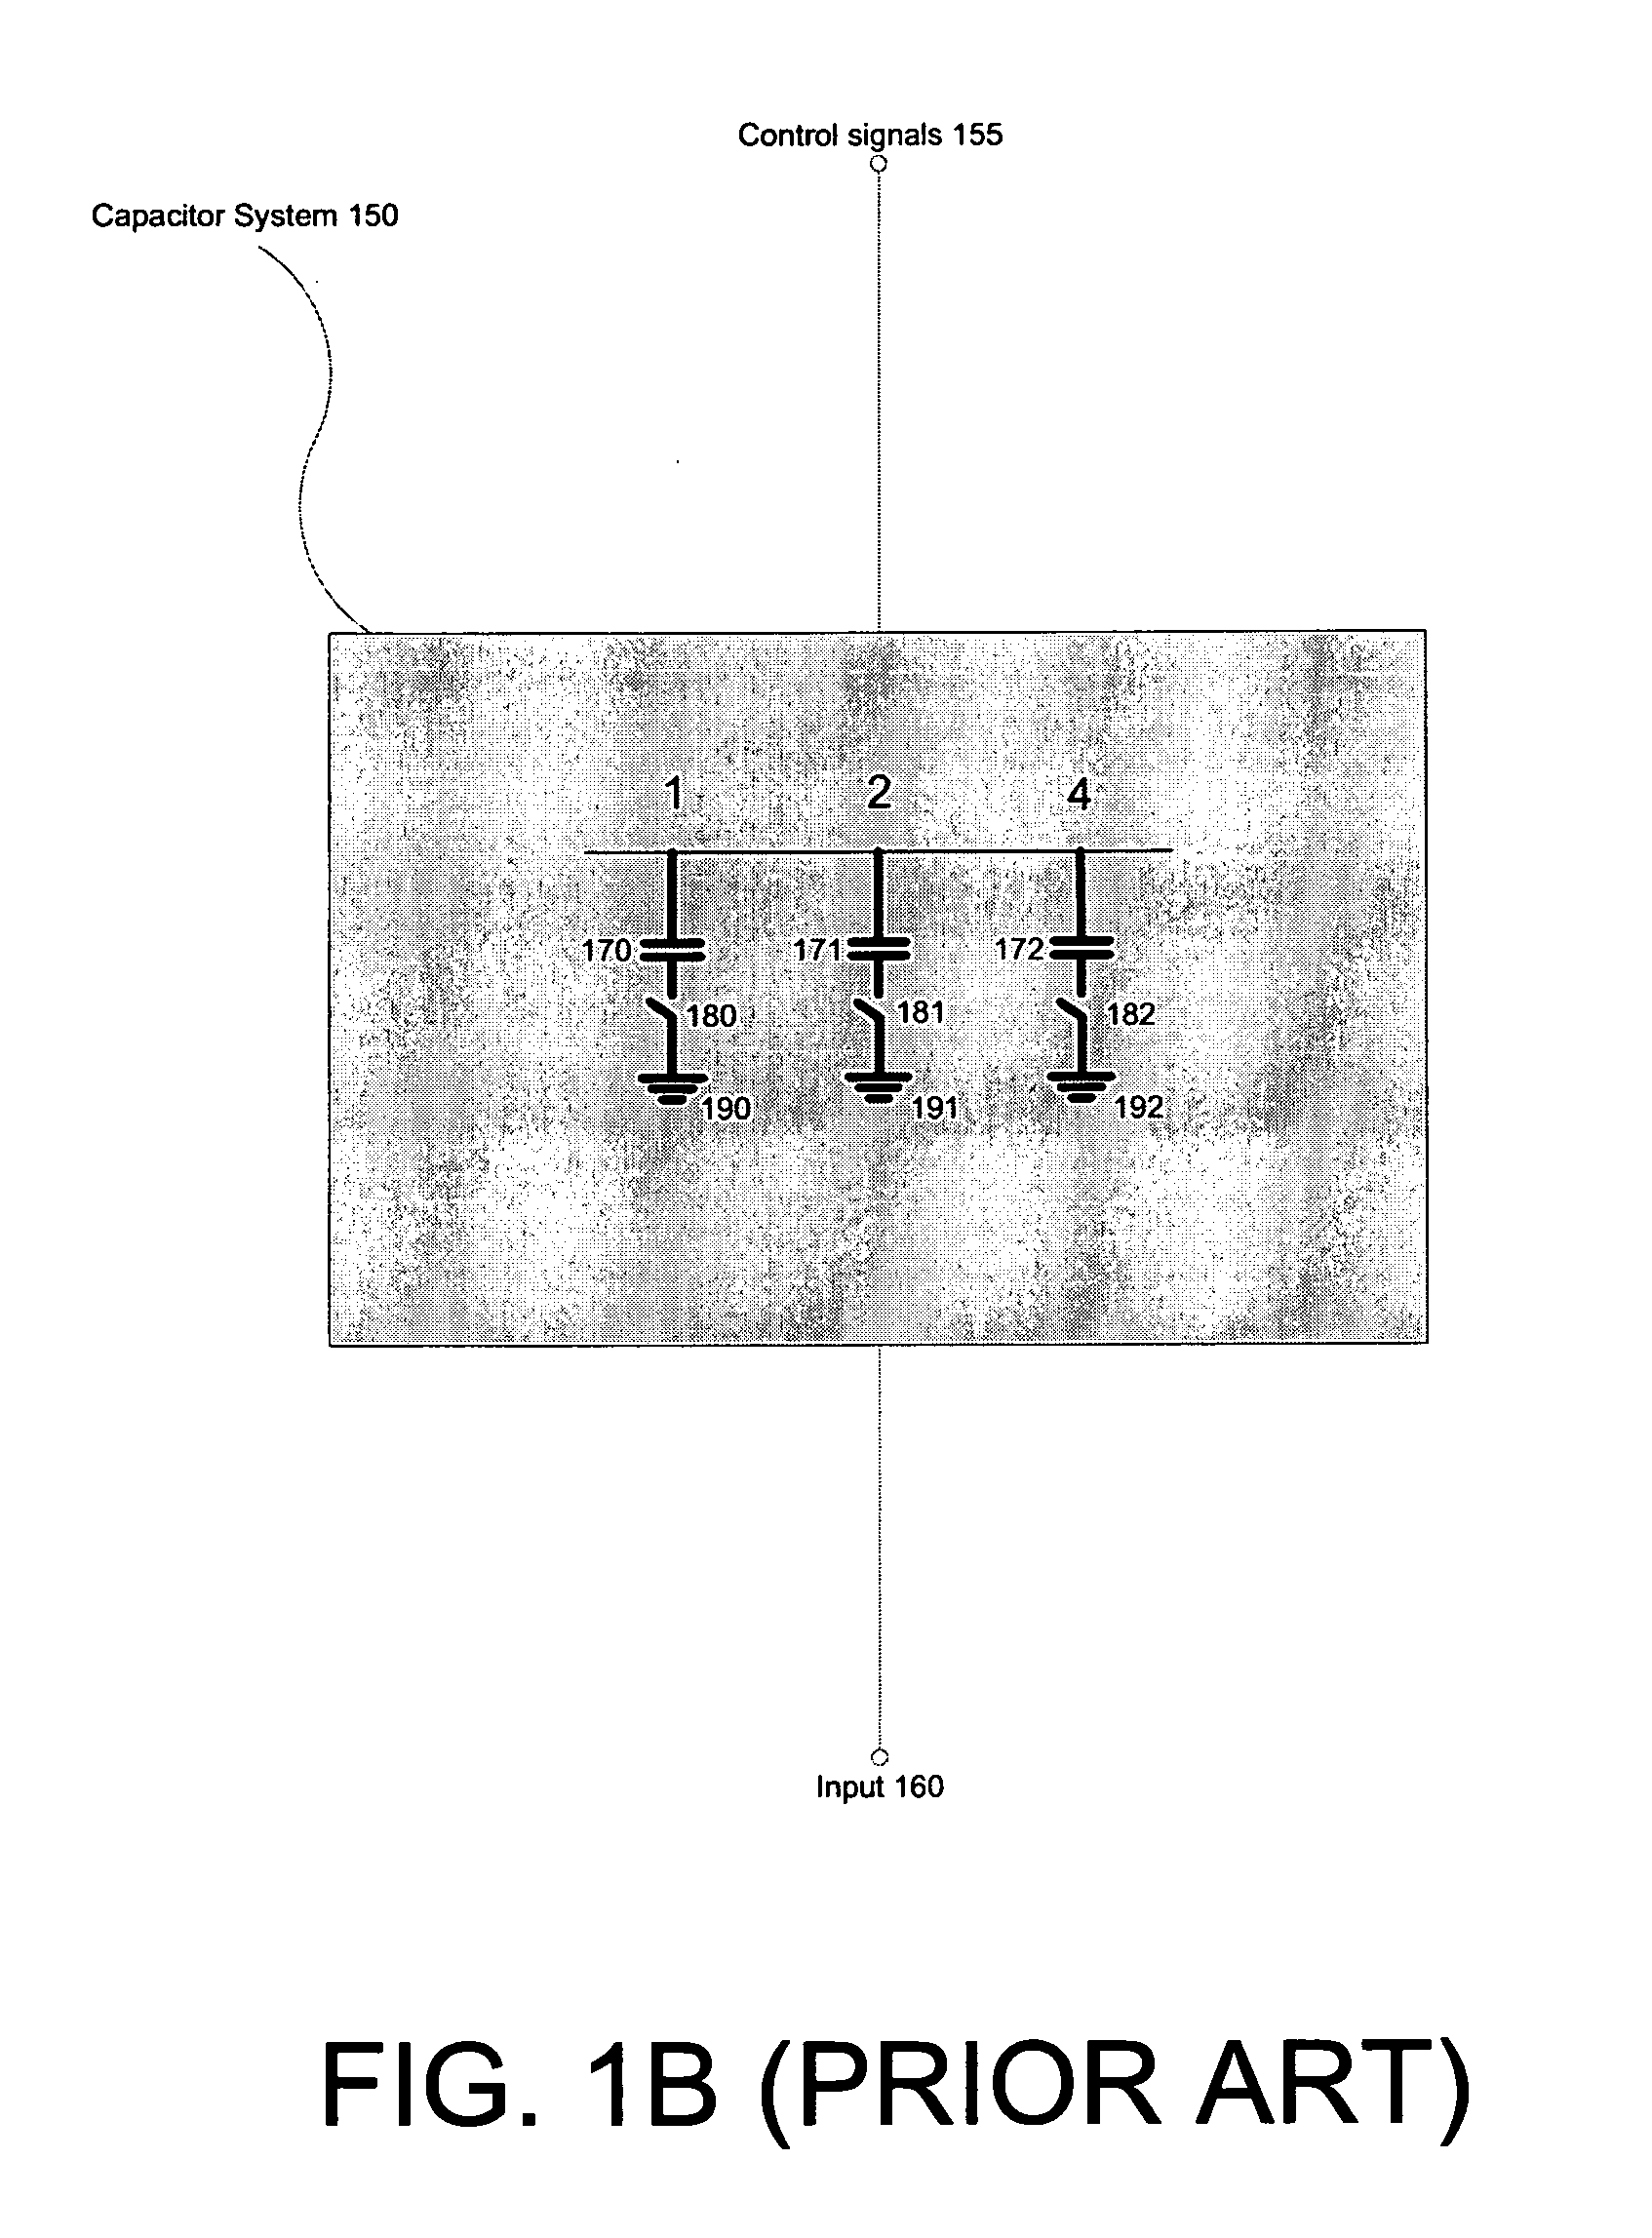 Small-step, switchable capacitor